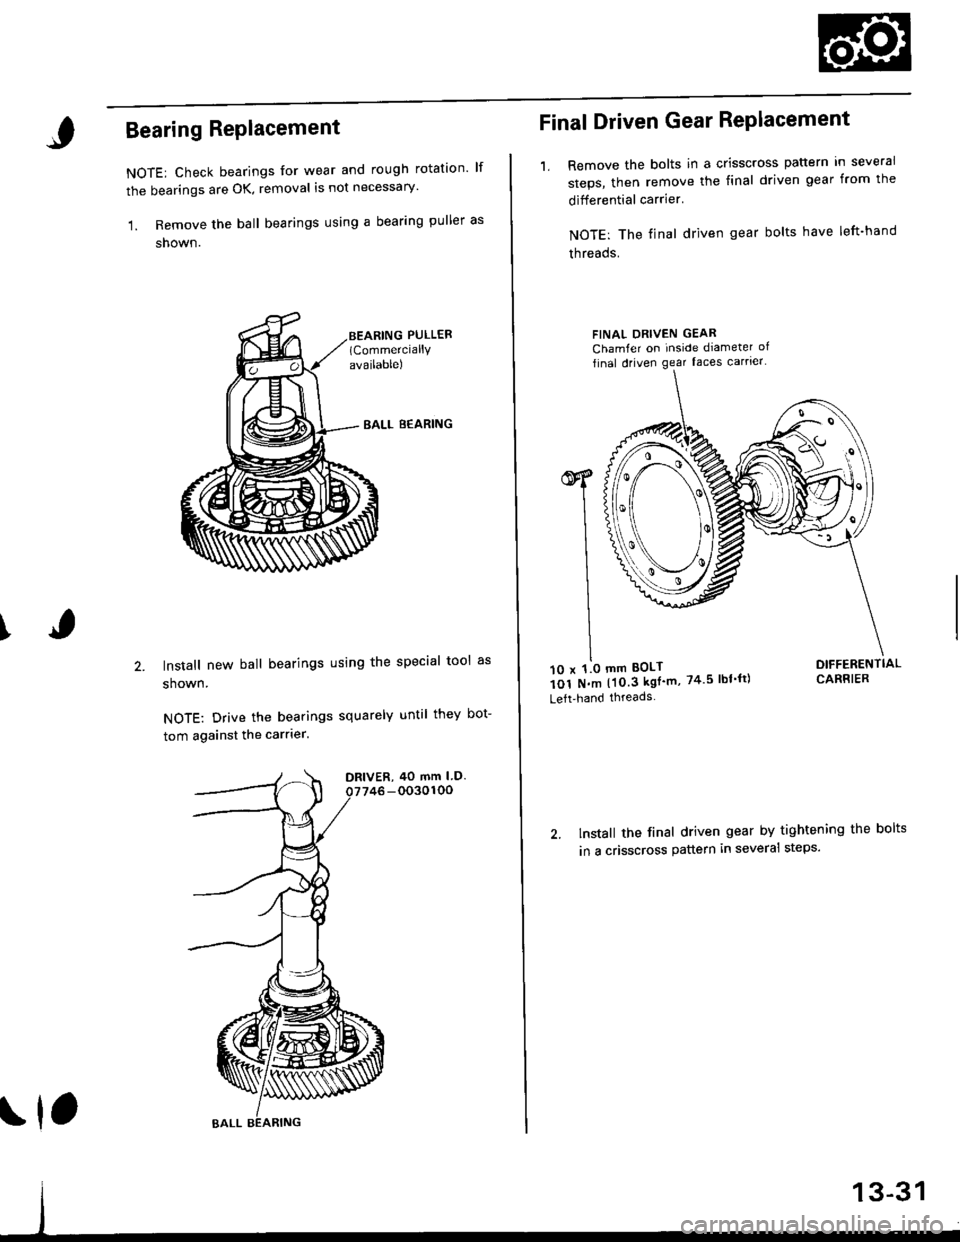 HONDA CIVIC 1998 6.G Workshop Manual I
Bearing RePlacement
NOTE: Check bearings for wear and rough rotation lf
the bearings are OK, removal is not necessary
1. Remove the ball bearings using a bearing puller as
shown.
EALL B€ARING
ln